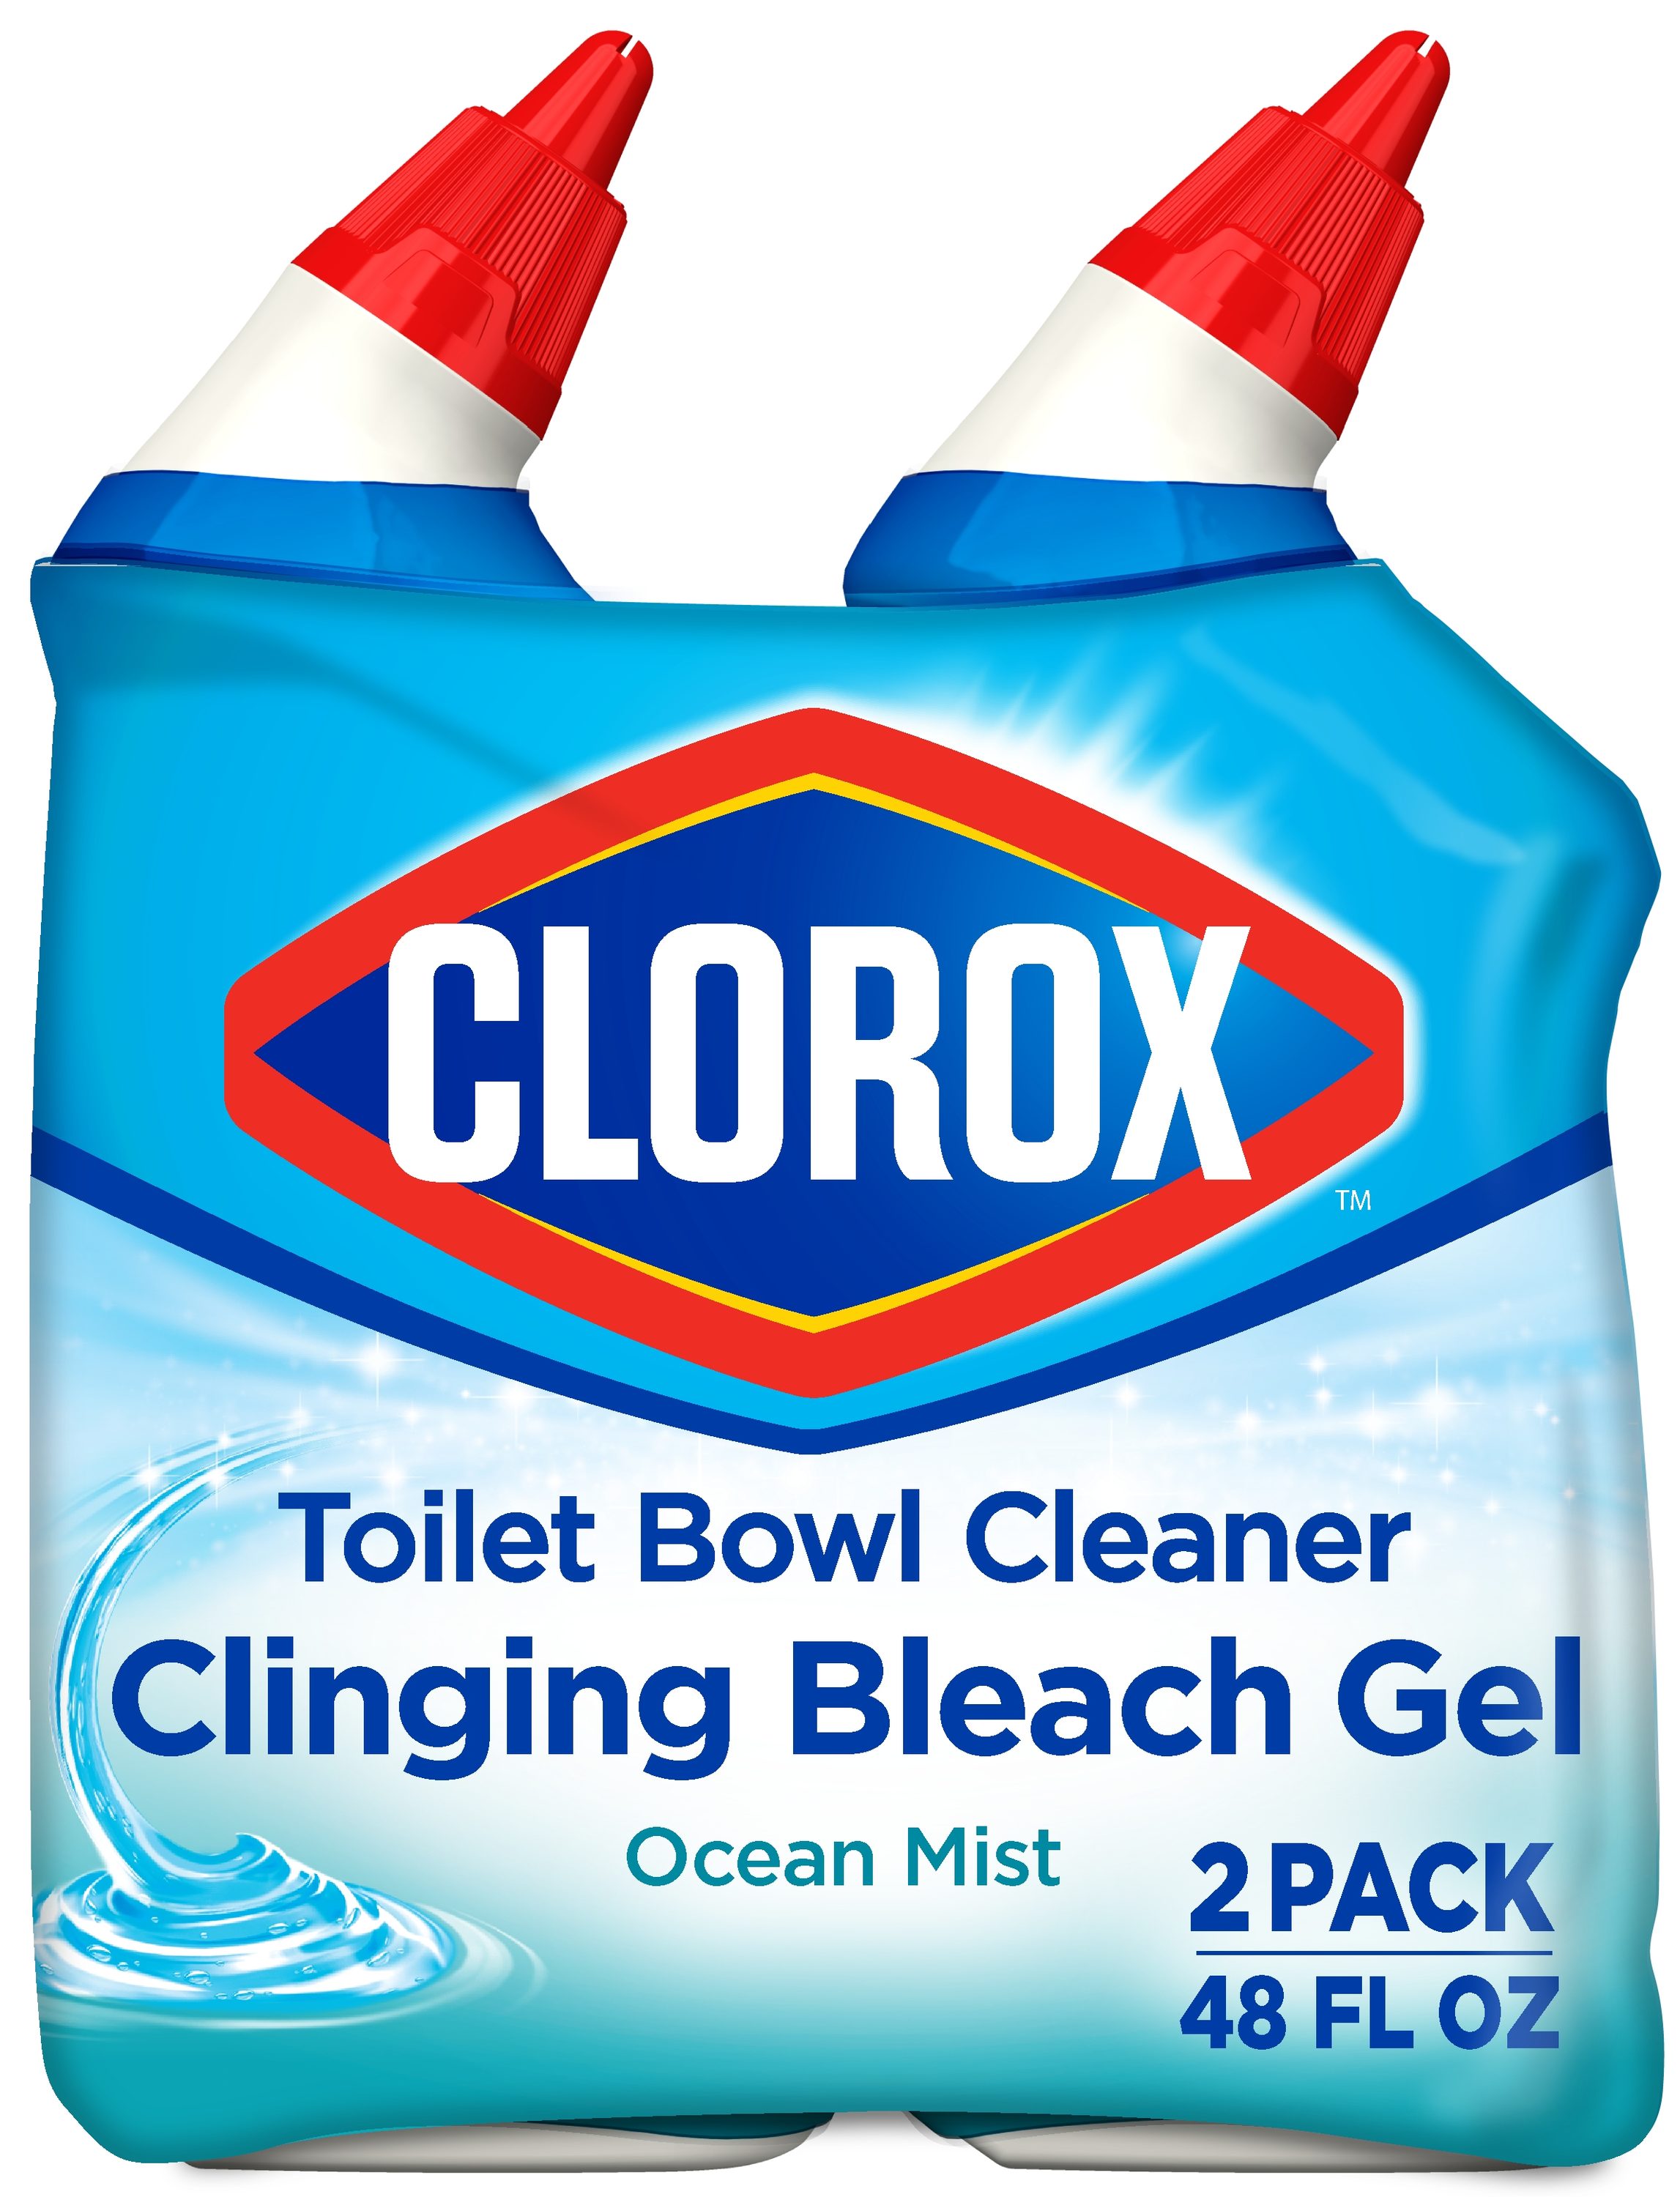 Kaboom Toilet Bowl Cleaner Kit - Drop-in Tablet, Deodorizing, Eco-Friendly,  with Bleach - Easy Installation, Powerful Cleaning & Rust Prevention in the  Toilet Bowl Cleaners department at